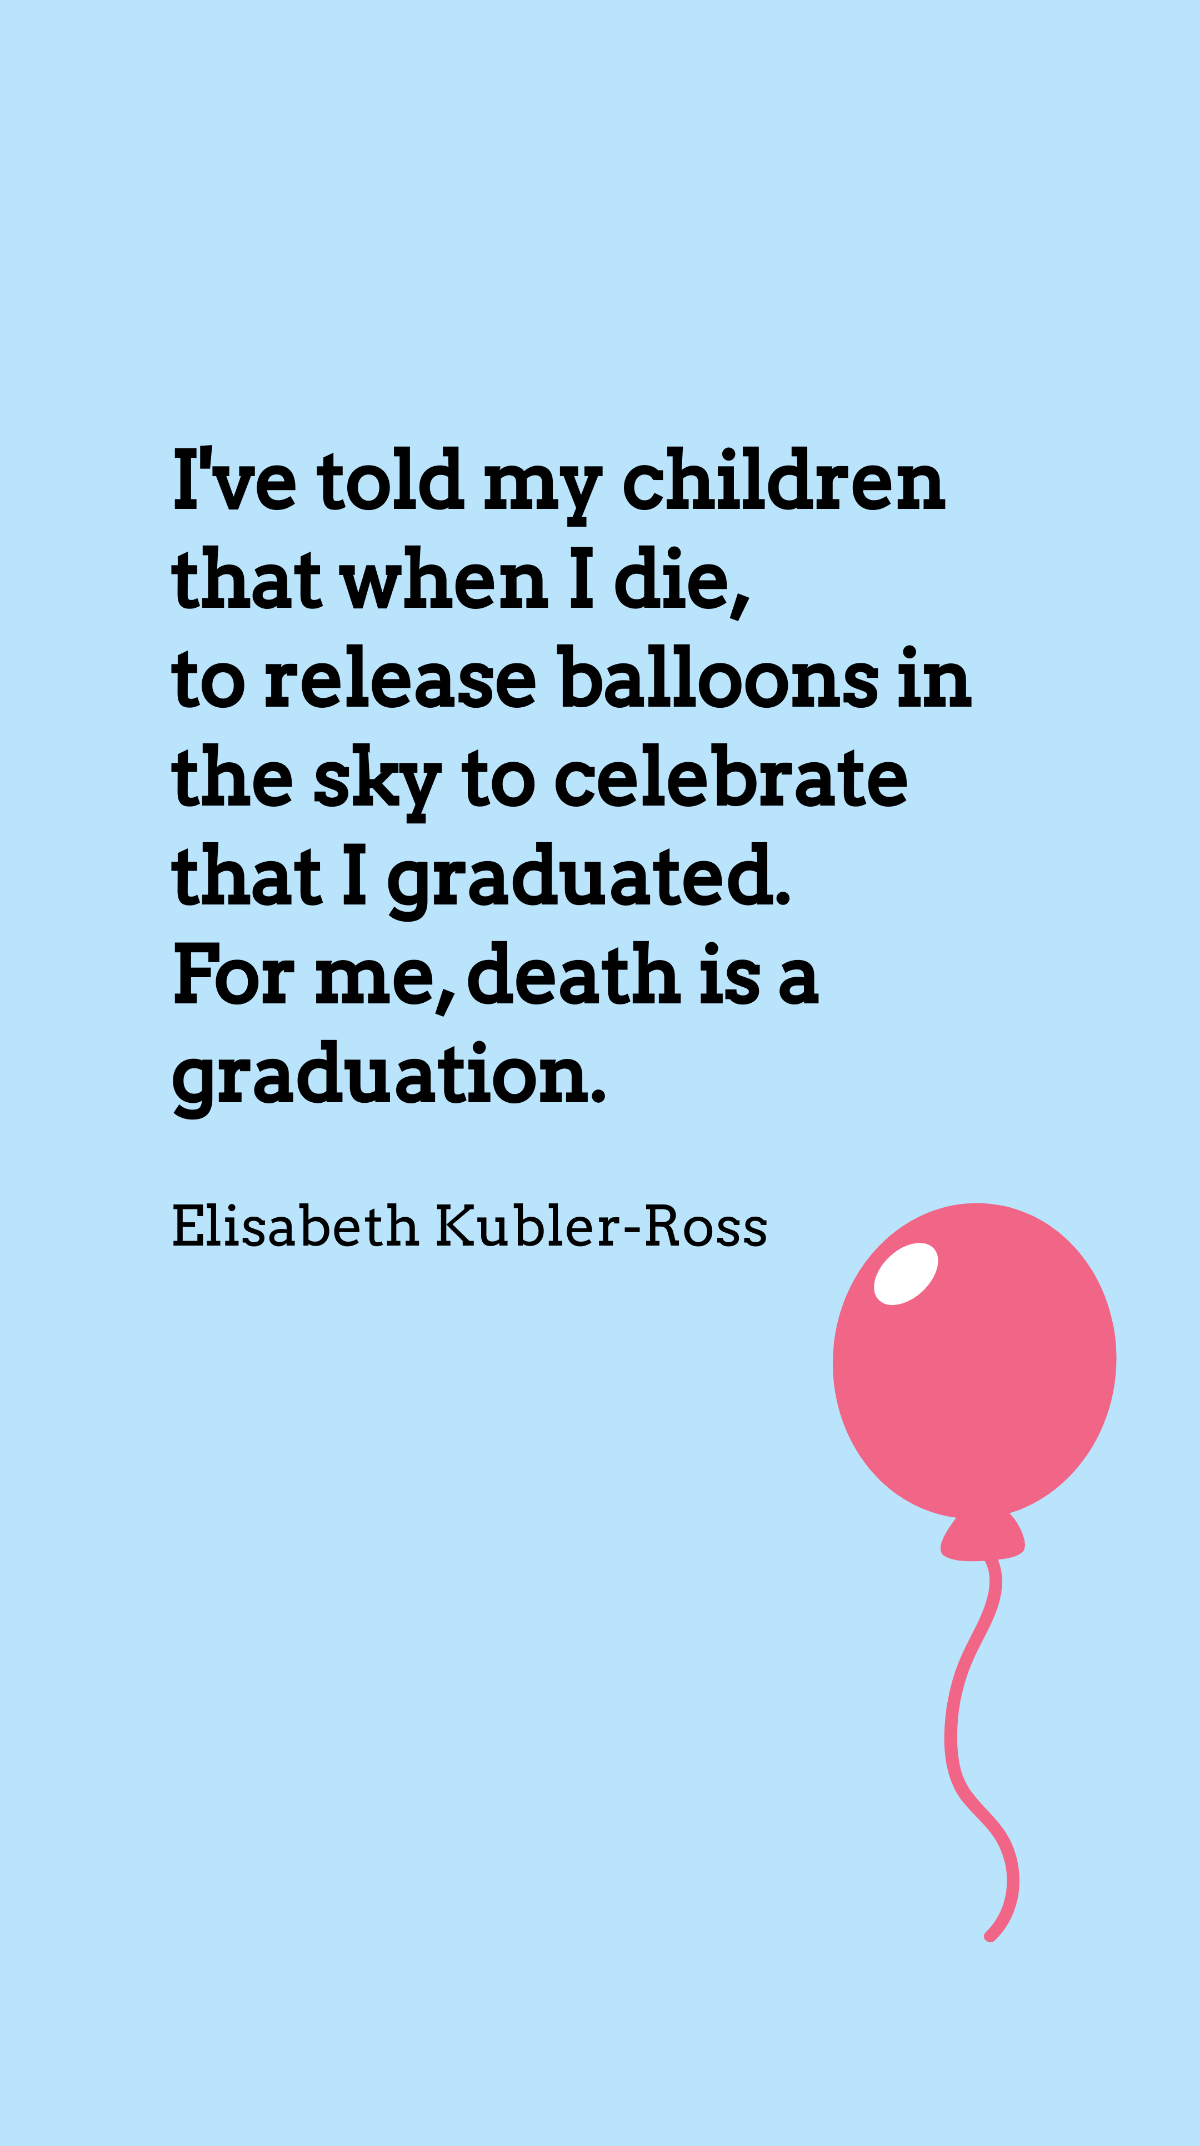 Elisabeth Kubler-Ross - I've told my children that when I die, to release balloons in the sky to celebrate that I graduated. For me, death is a graduation. Template